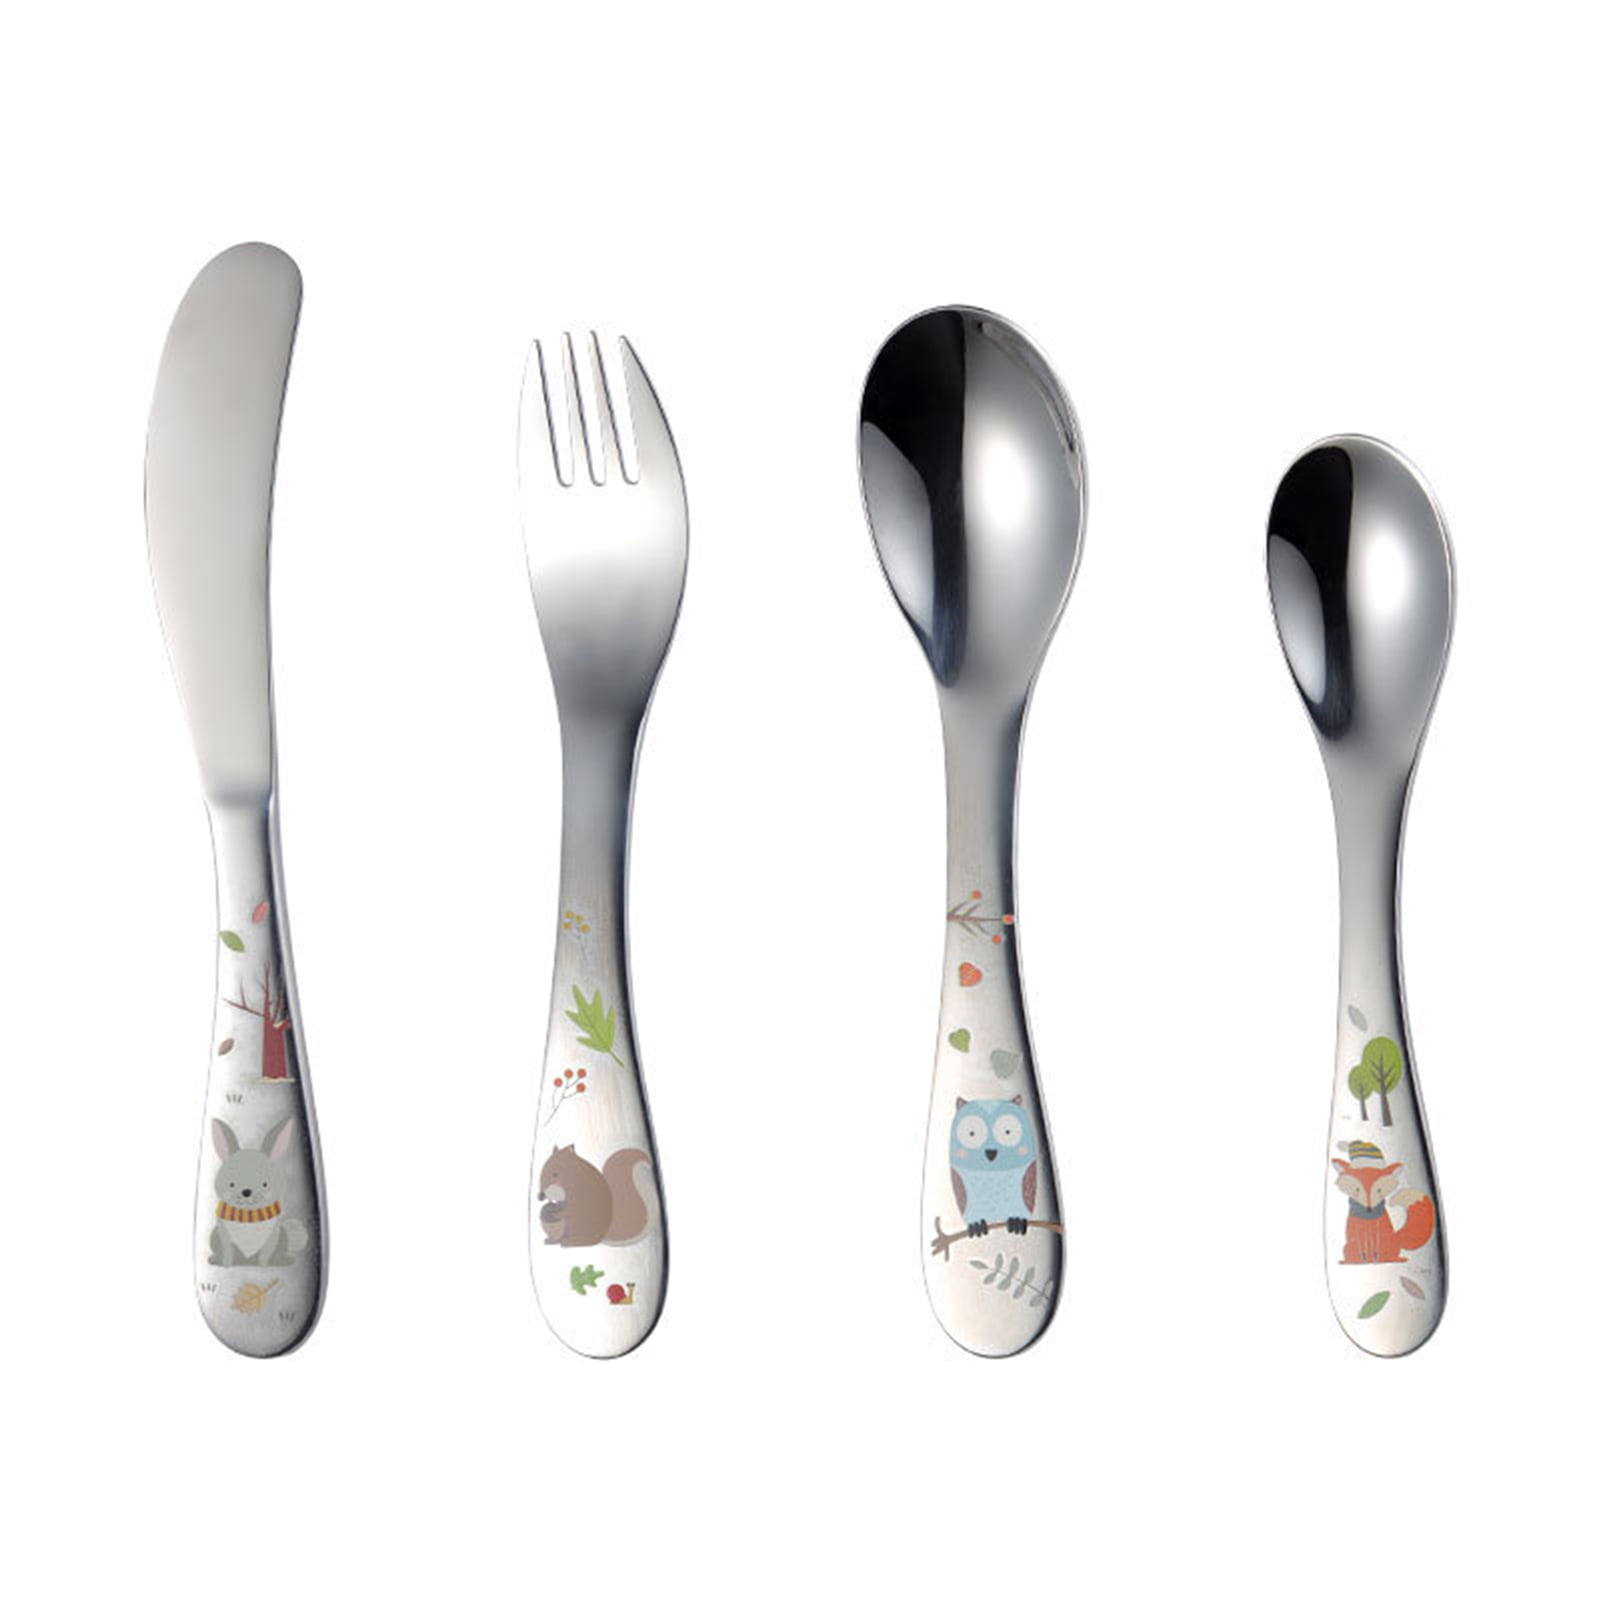 NEW THE FIRST YEARS DISNEY PRINCESS MOUSE FORK & SPOON 9 MONTHS STAINLESS STEEL 